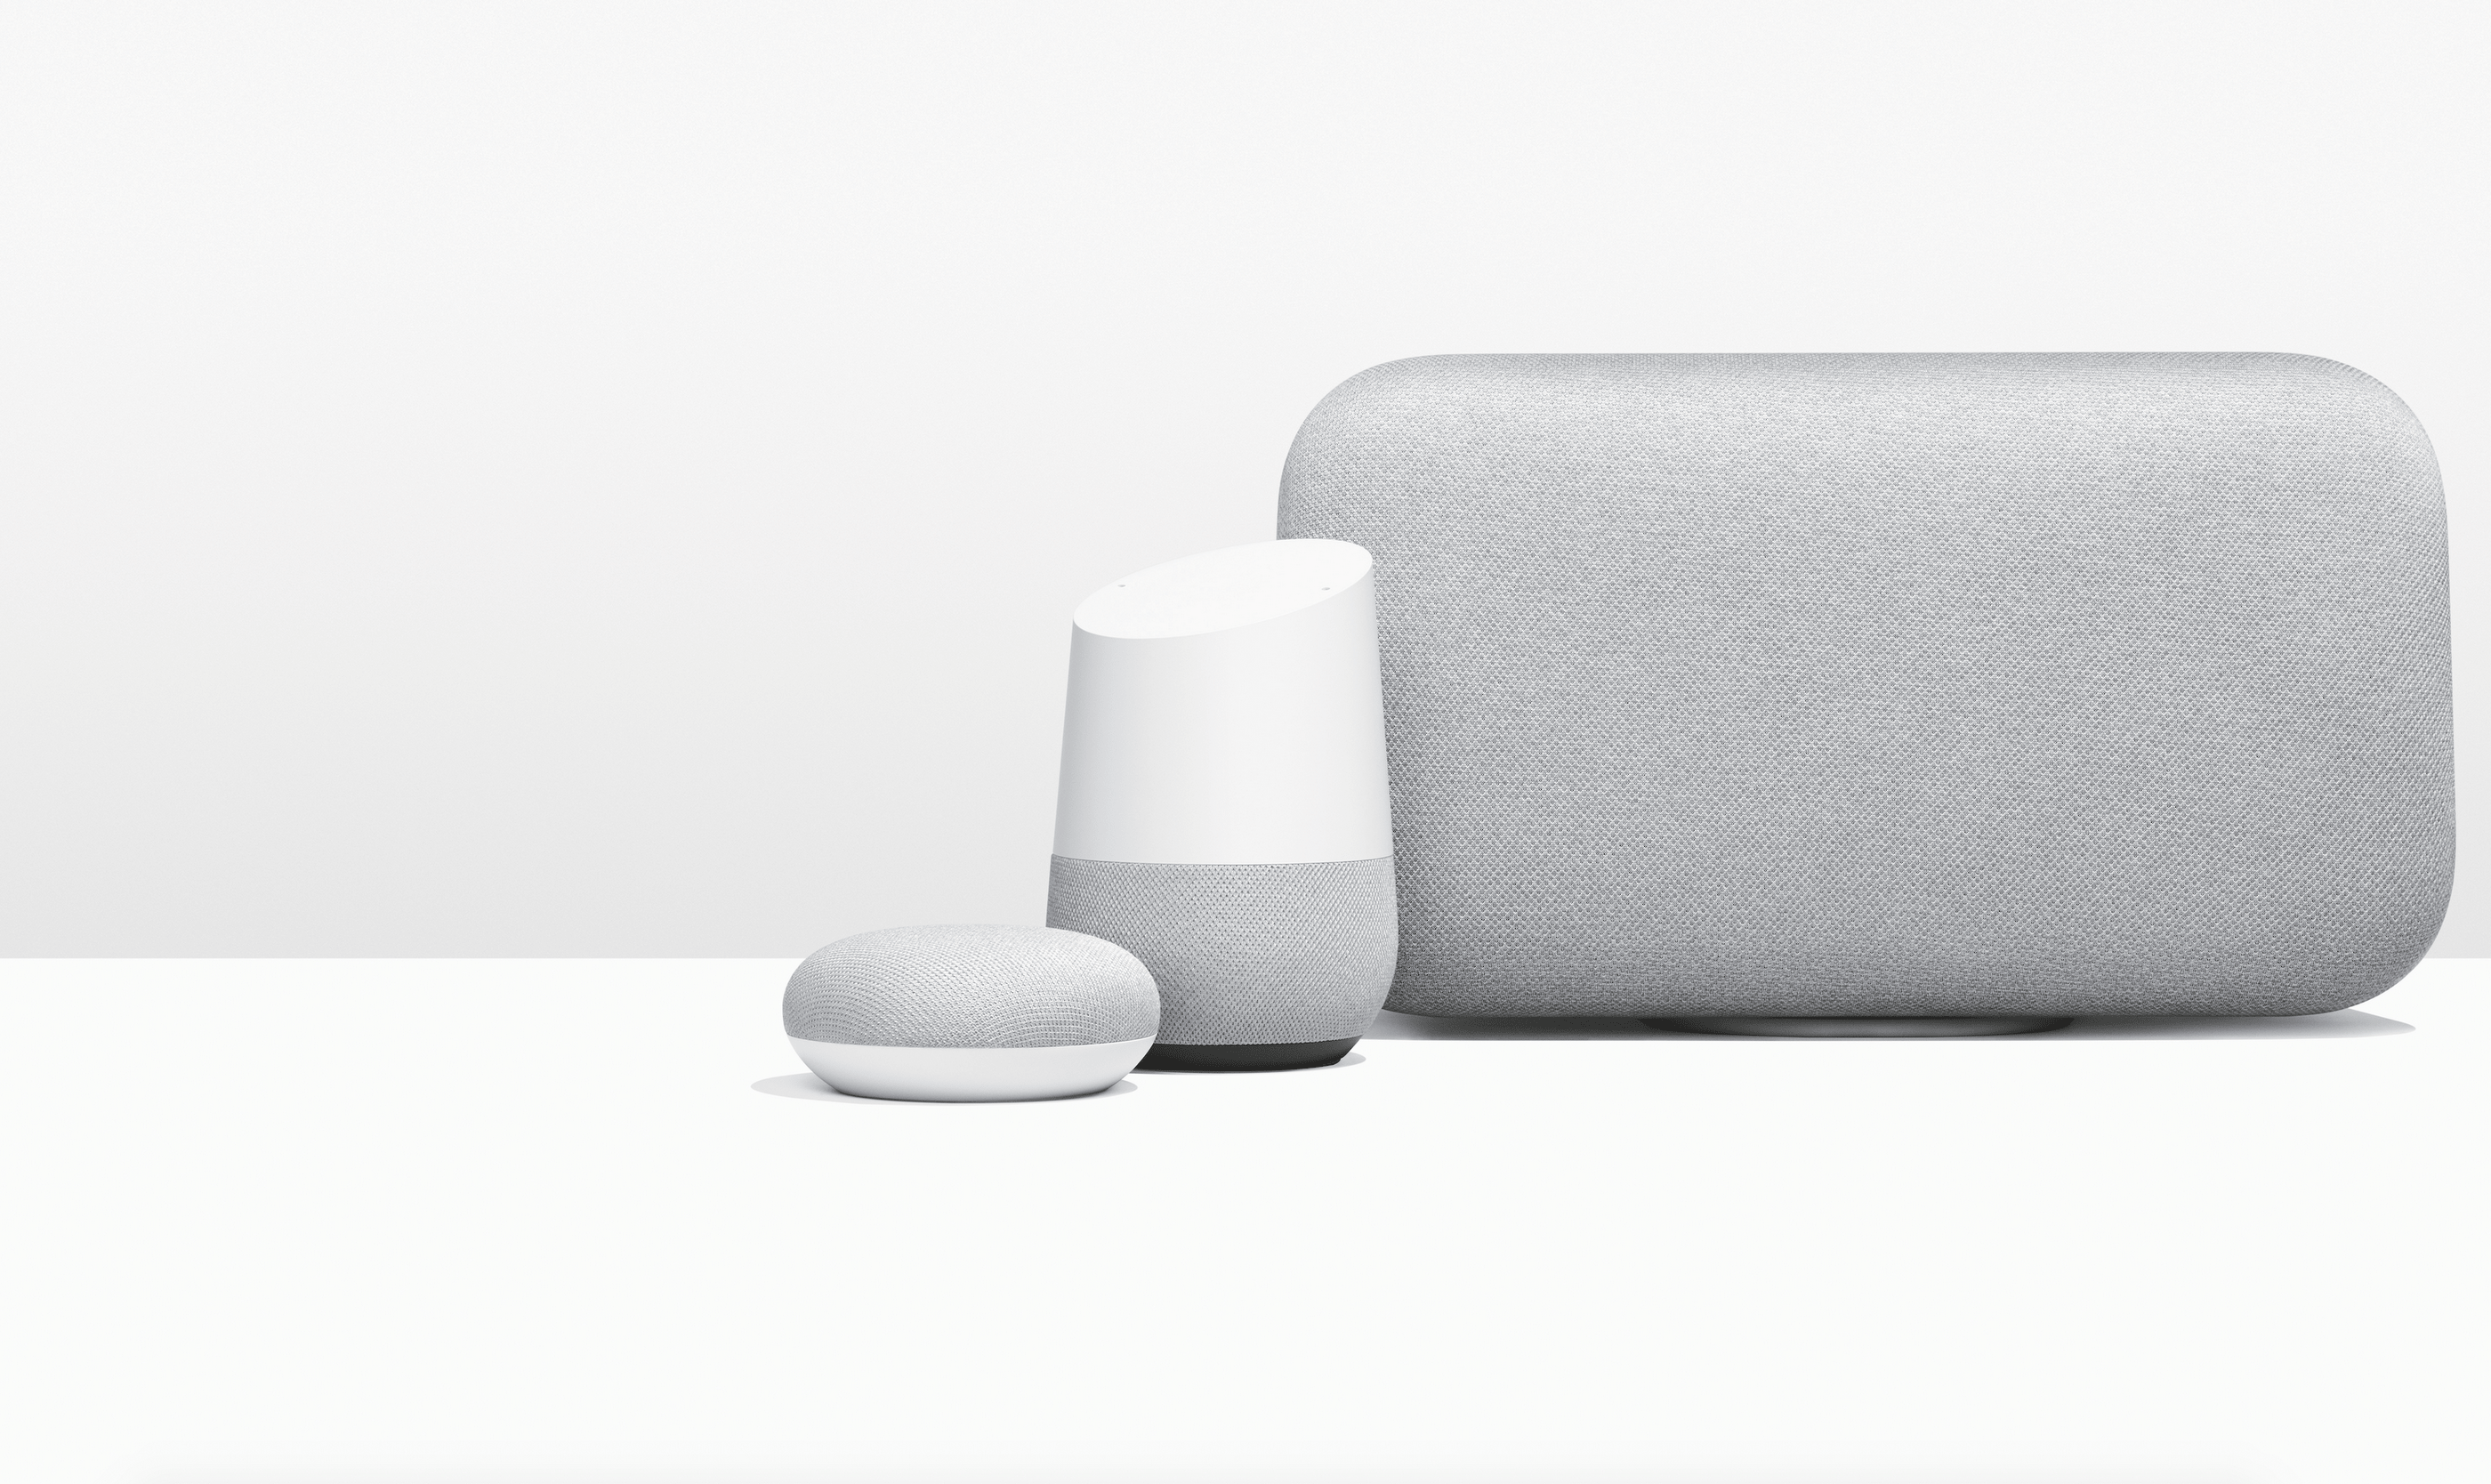 What Can Google Home Do? What Devices are Compatible?